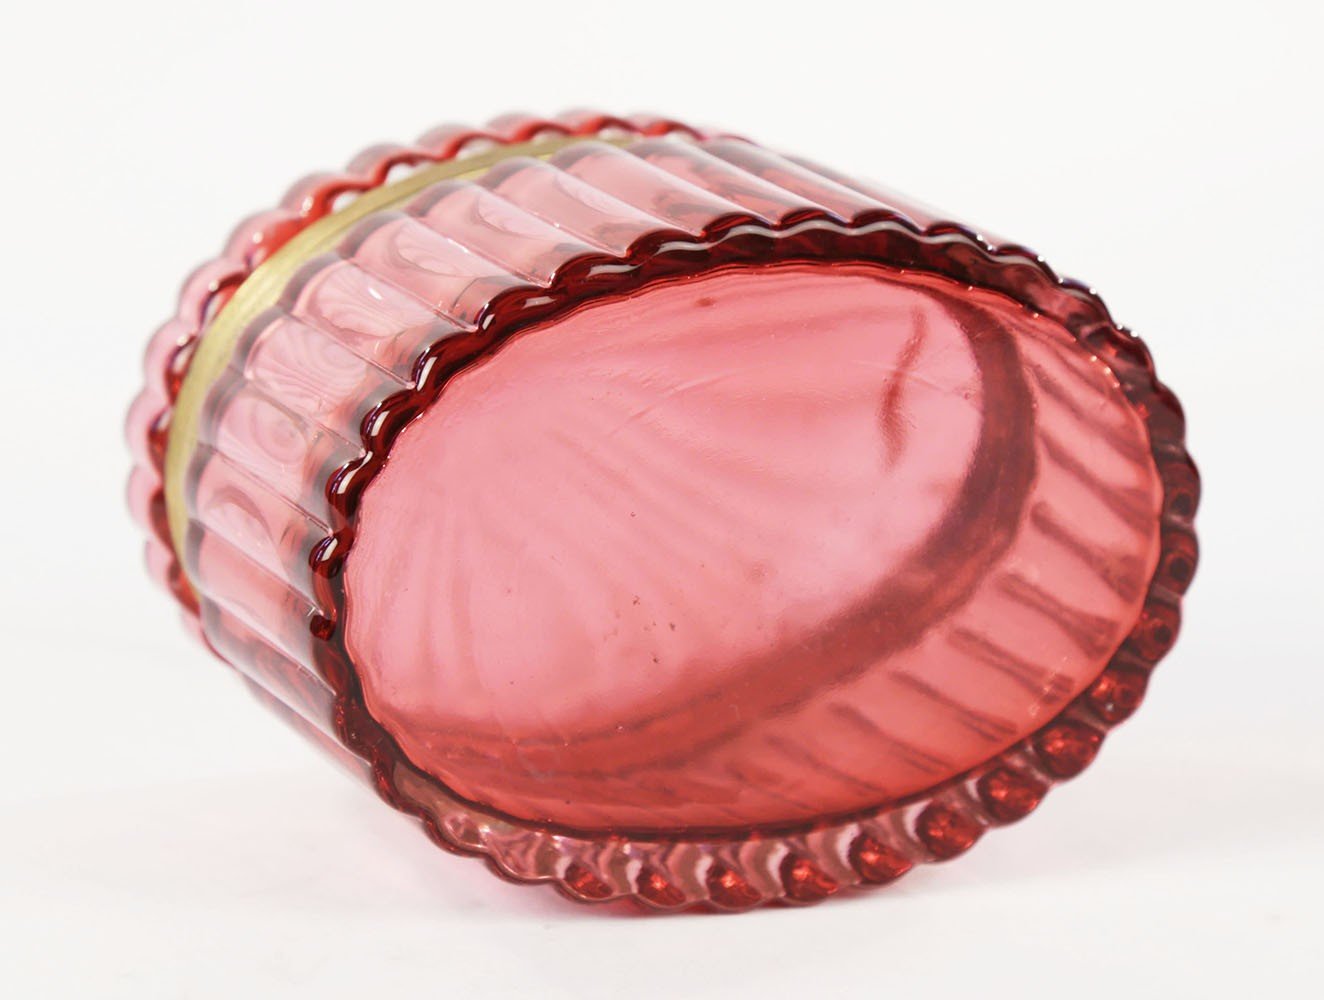 Ruby Glass Hinged Box by 19th Century French School